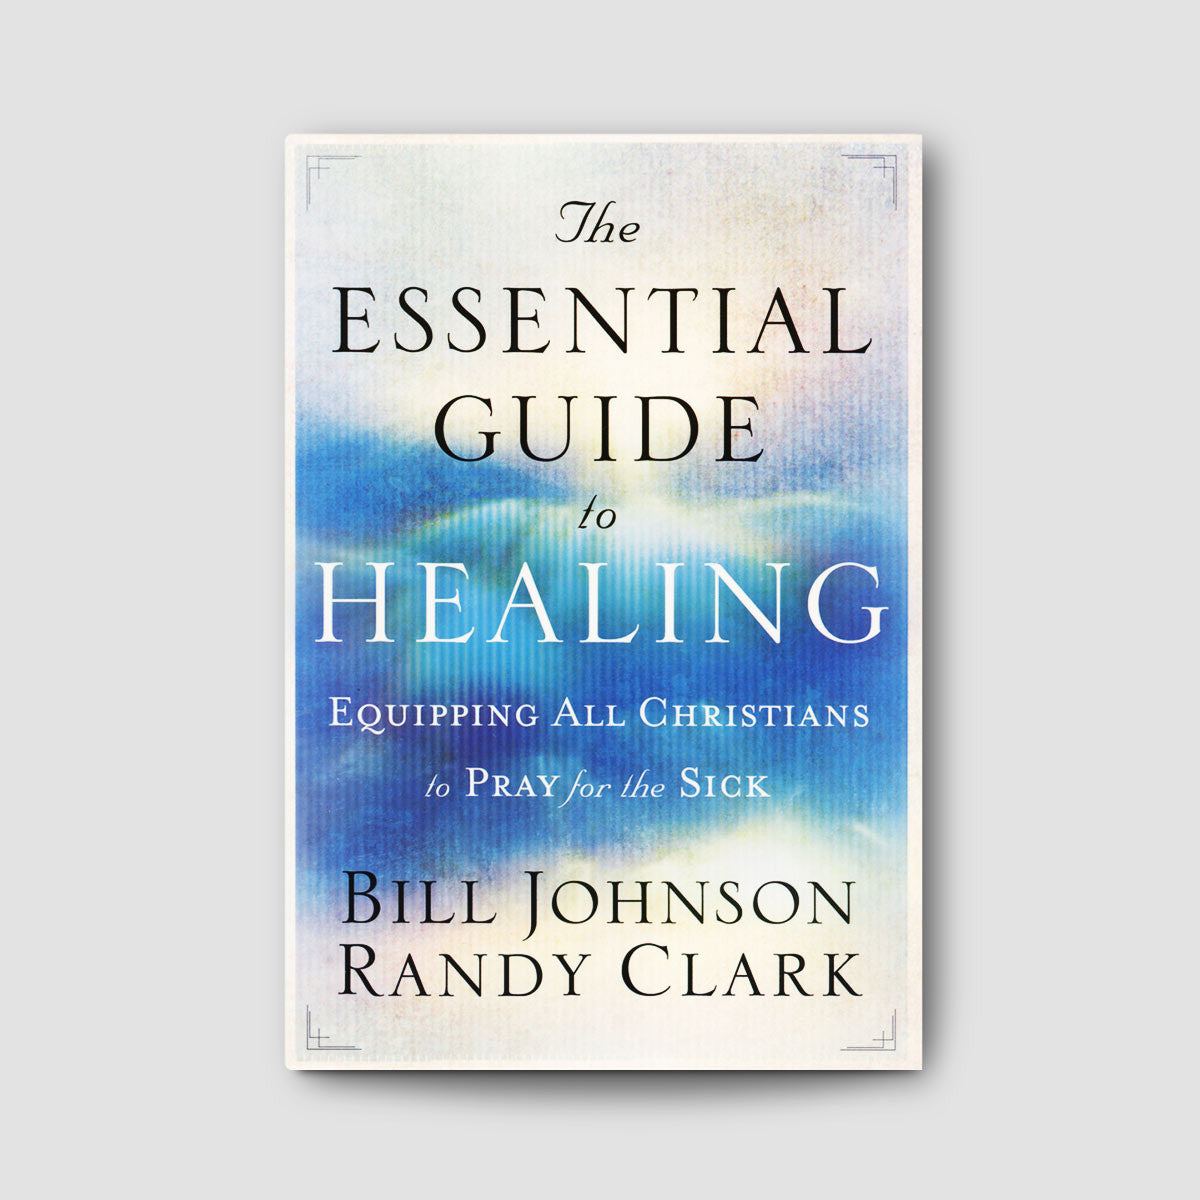 The Essential Guide to Healing